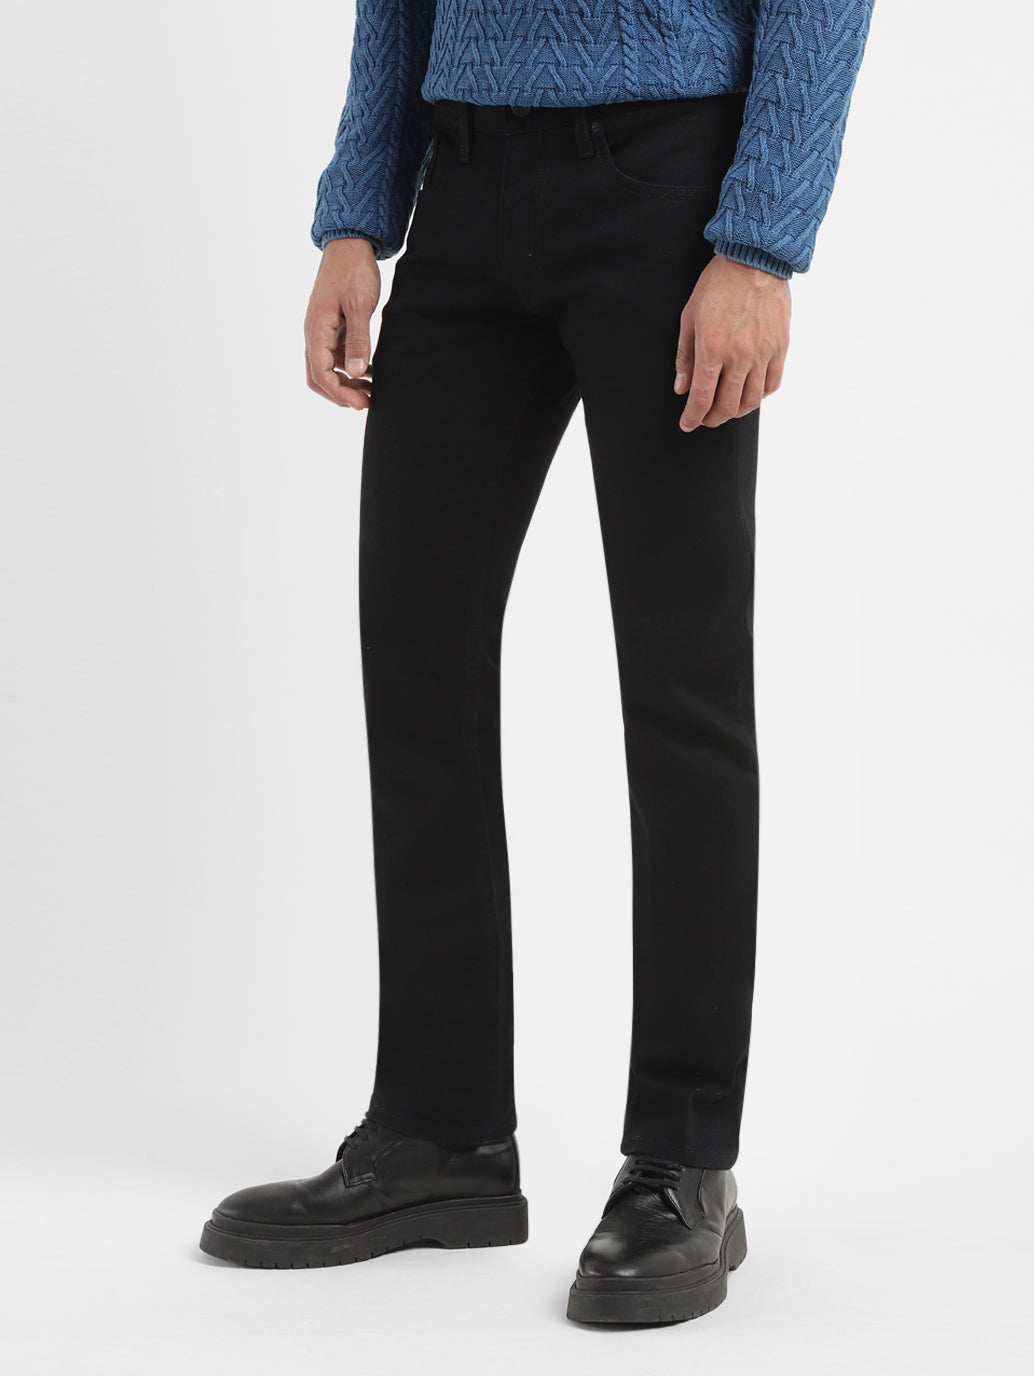 Buy the perfect pair of jeans for men online – Levis India Store